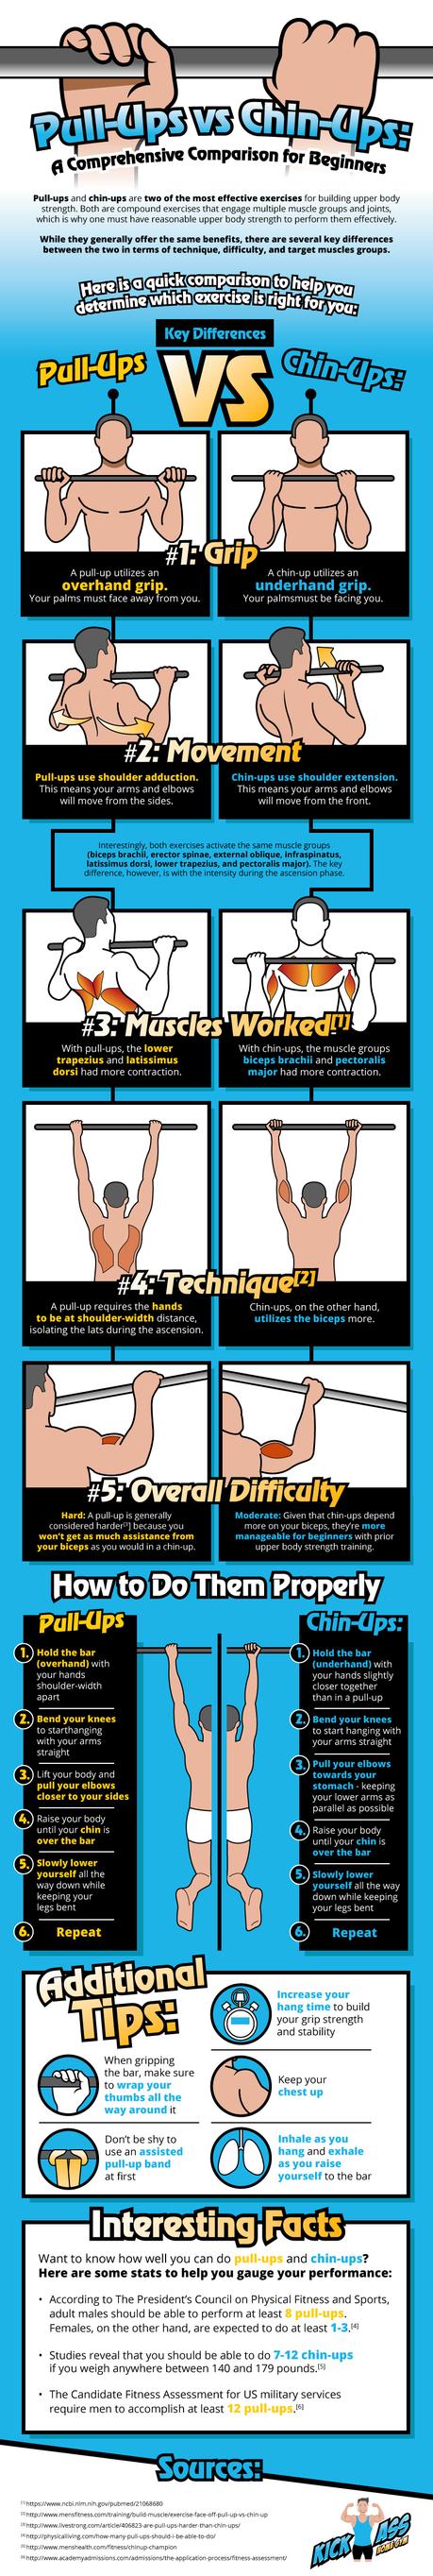 Pull-Ups Vs Chin-Ups: A Comprehensive Comparison For Beginners